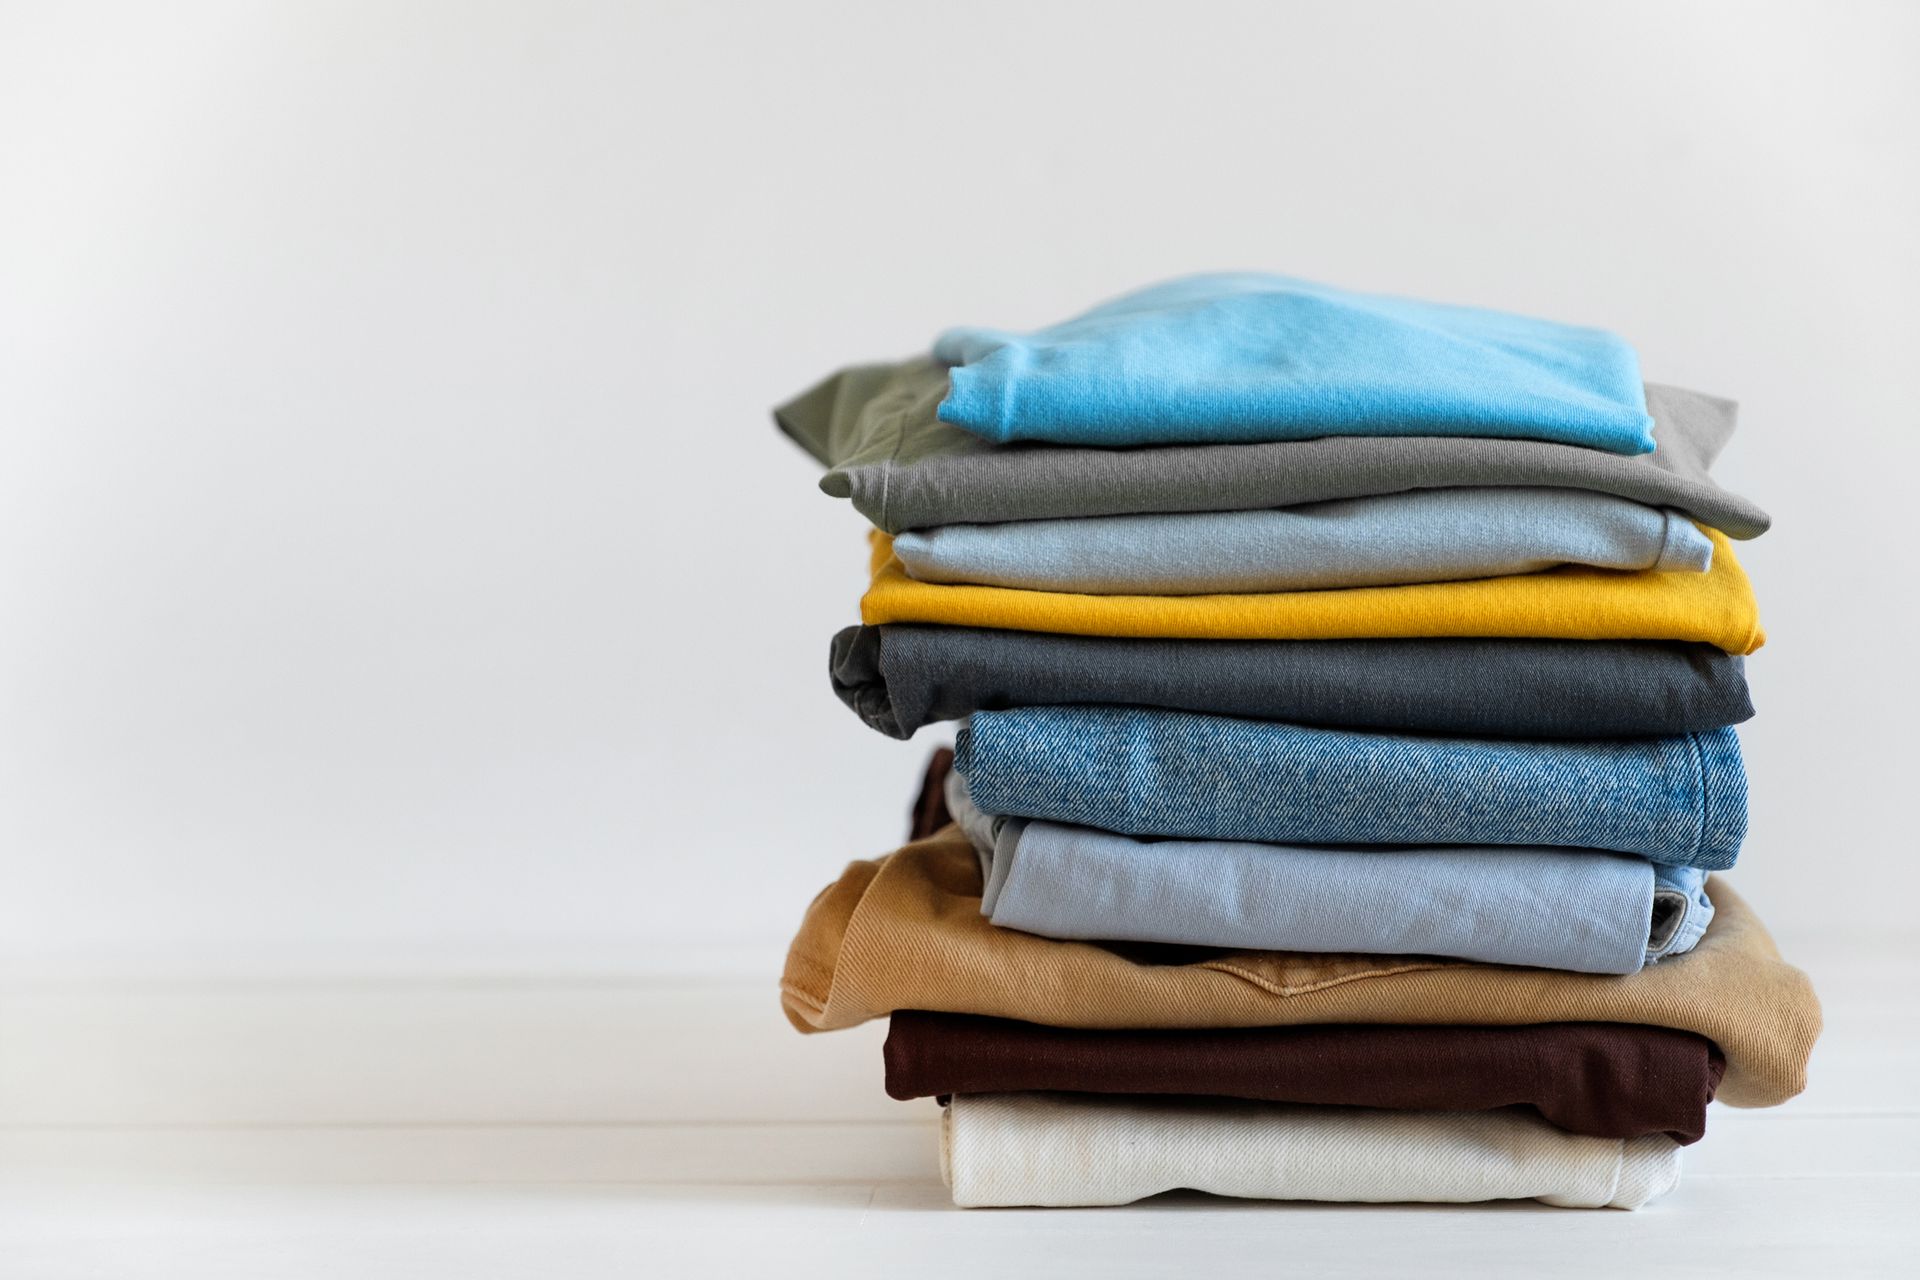 Folded Clothes — Dry Clean Shirts On Hangers in Holyoke, MA